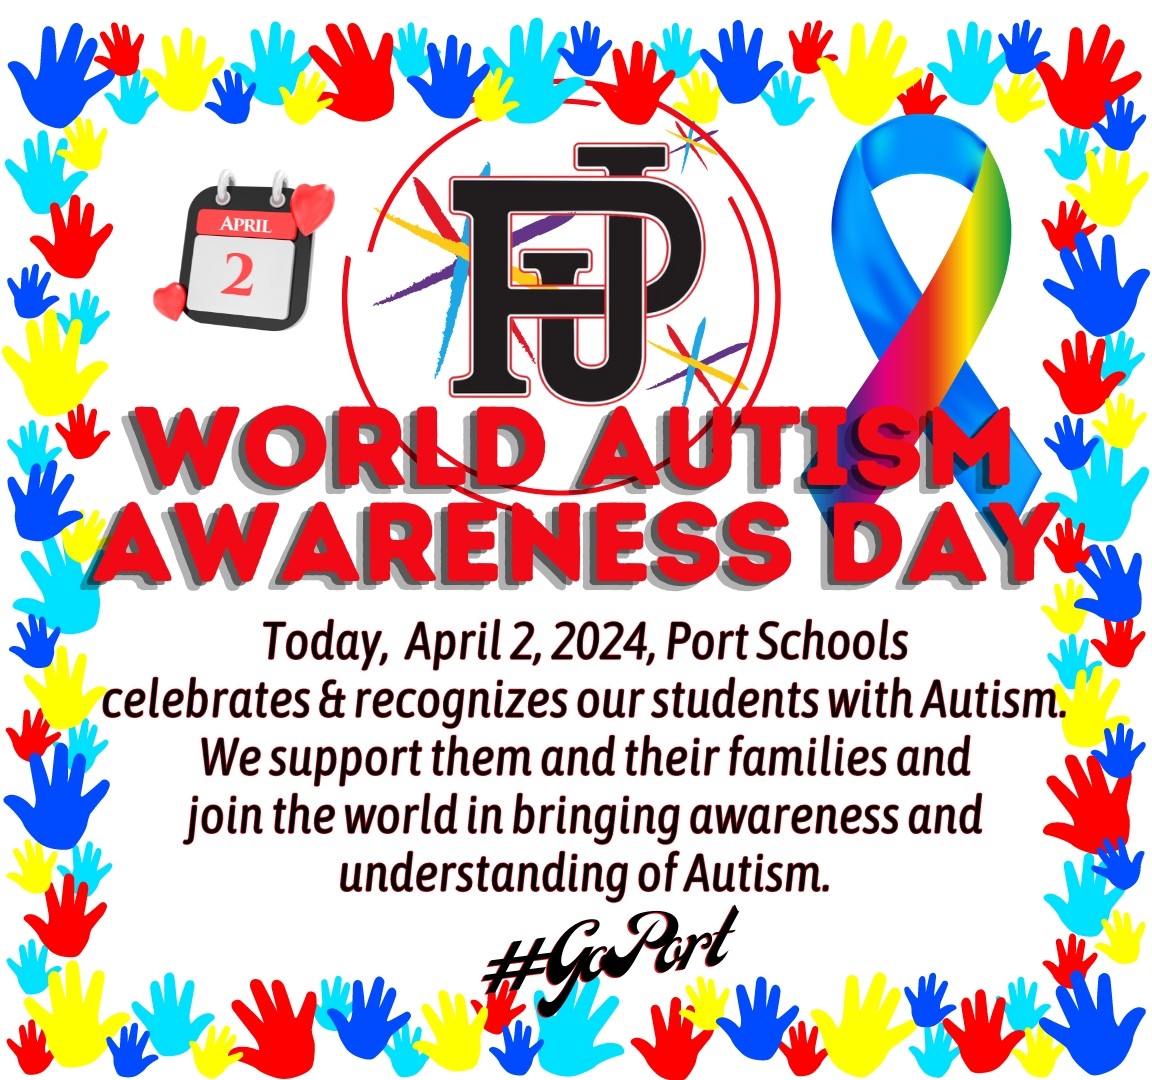 Today, April 2, 2024, Port Schools celebrates & recognizes our students w Autism. We support them & their families and join the world in bringing awareness and understanding of Autism. #WorldAutismAwarenessDay @Autism @autismspeaks @andrewmarotta21 @JohnJBell15 @ouboces @SAANYS